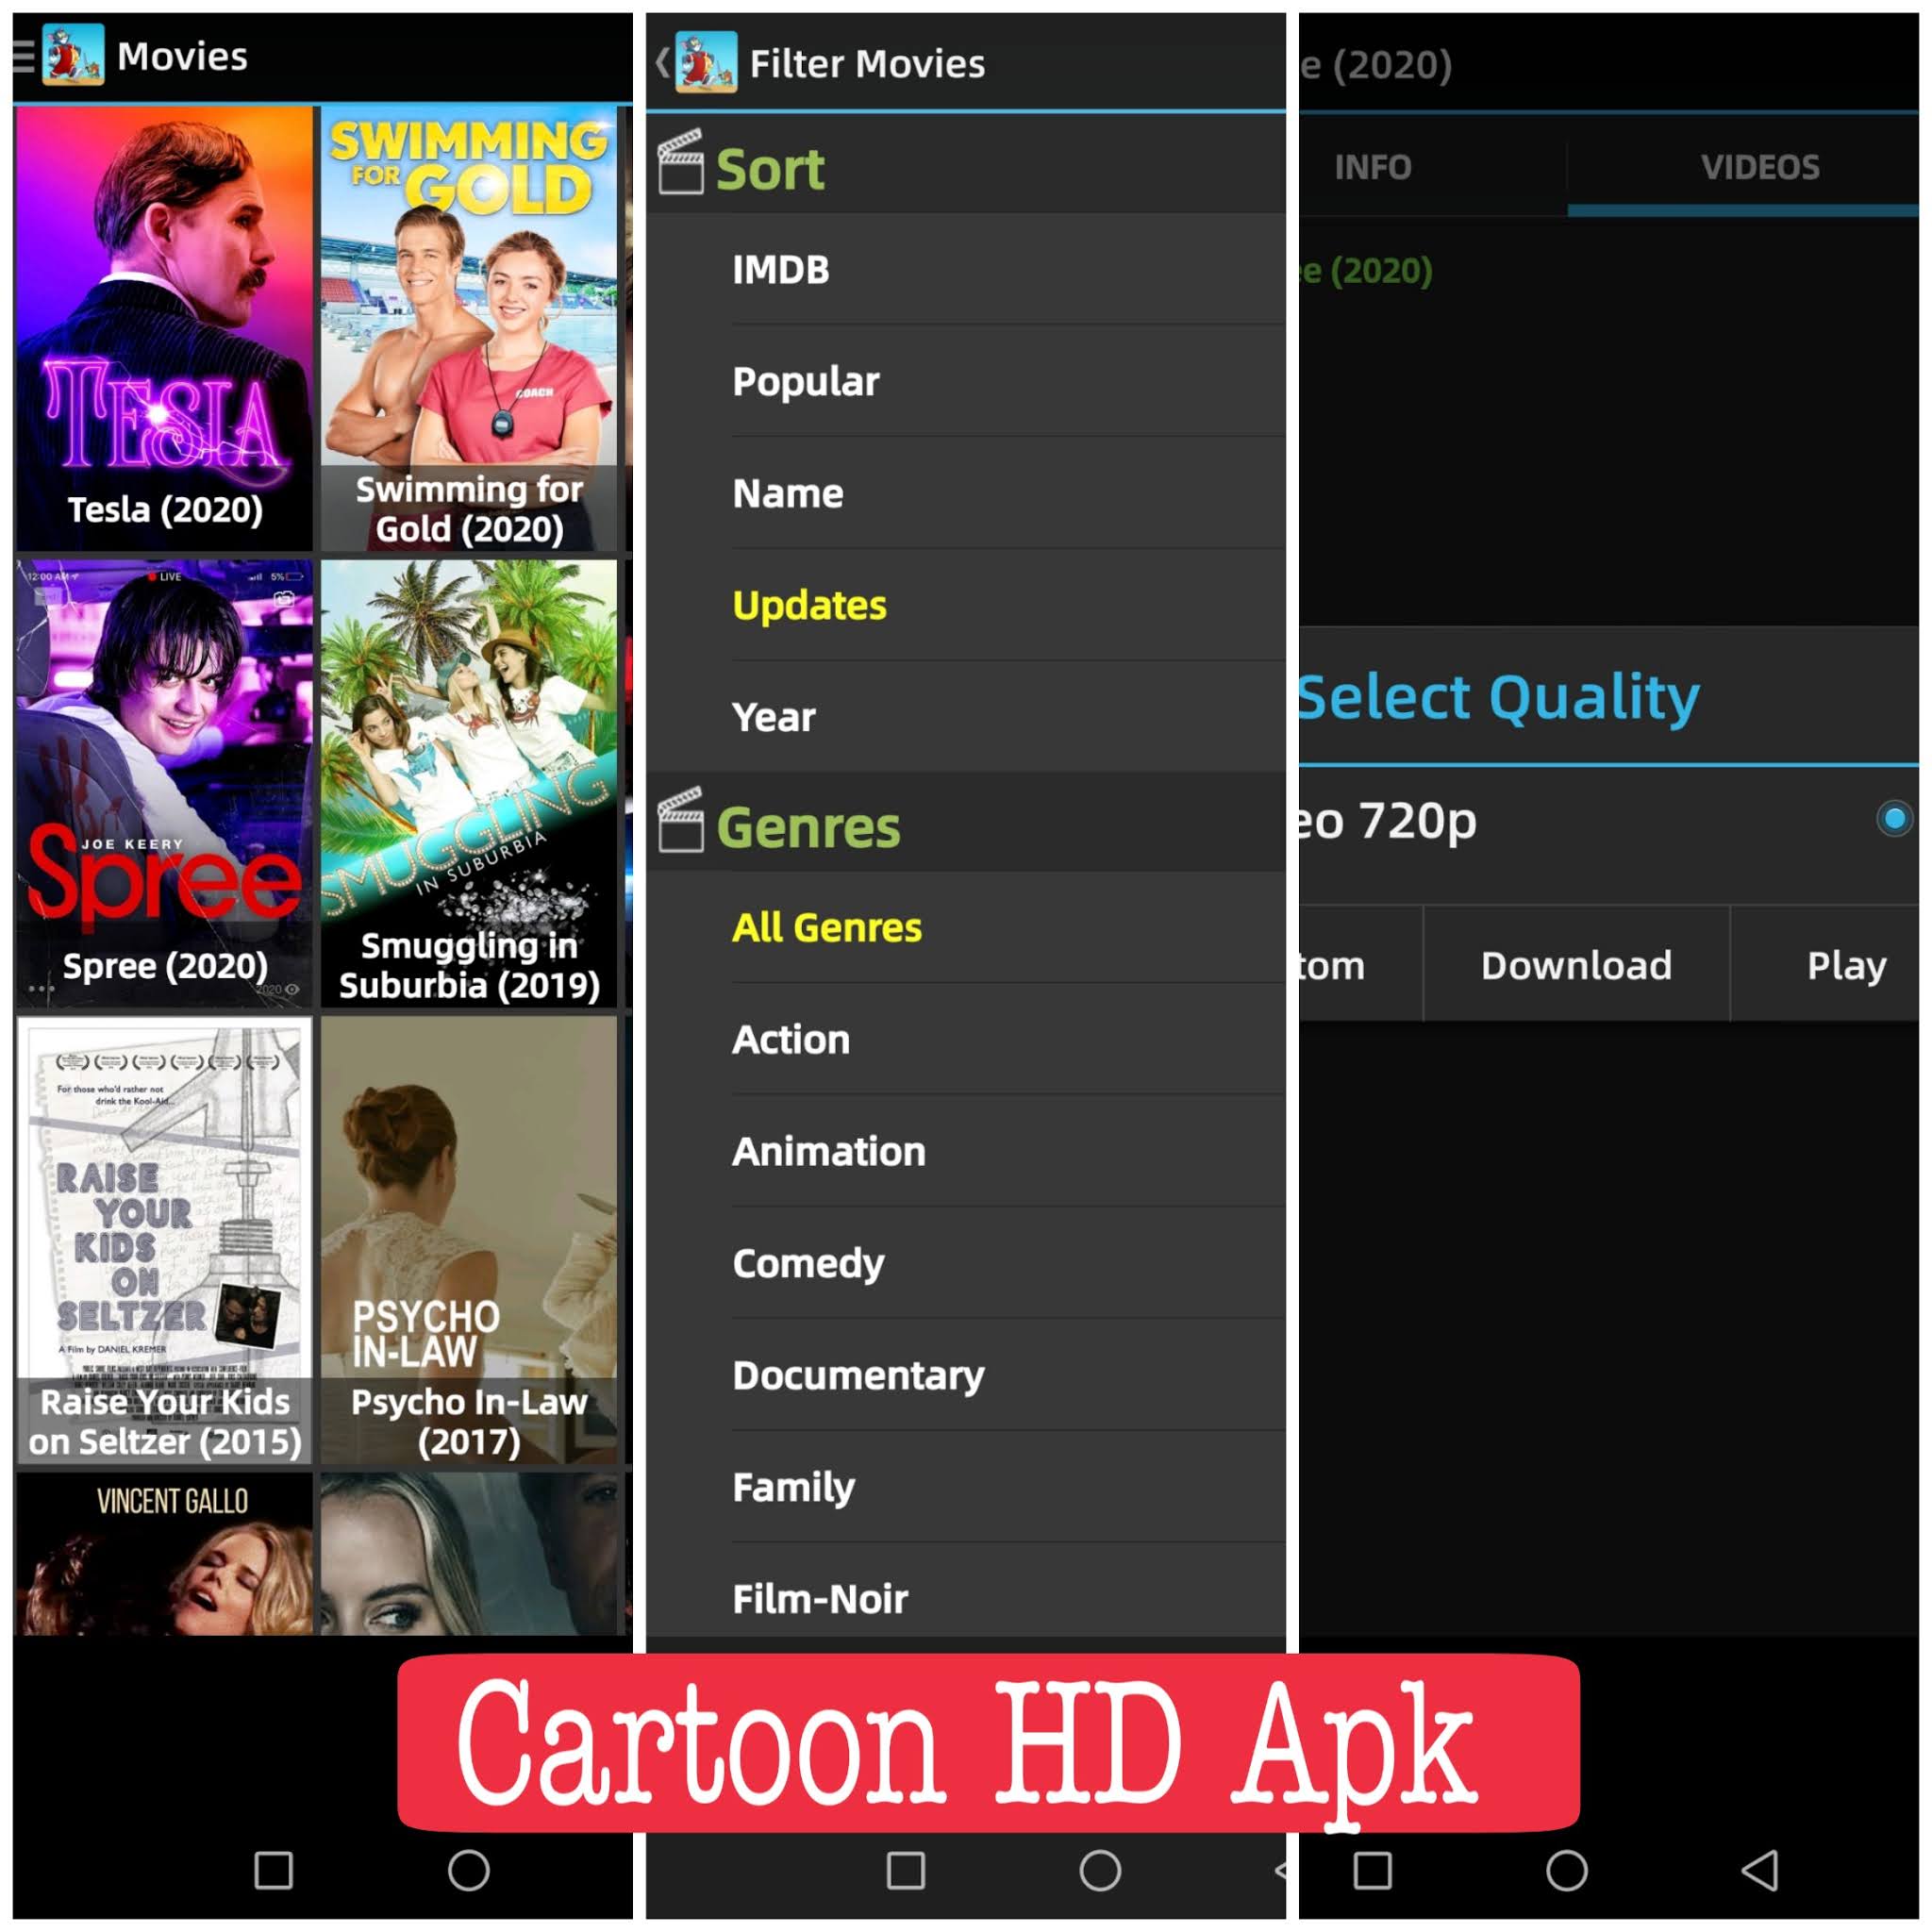 Download Cartoon HD Apk V3.0.3 – Watch and Download Free Cartoons, Movies, TV Shows 2021